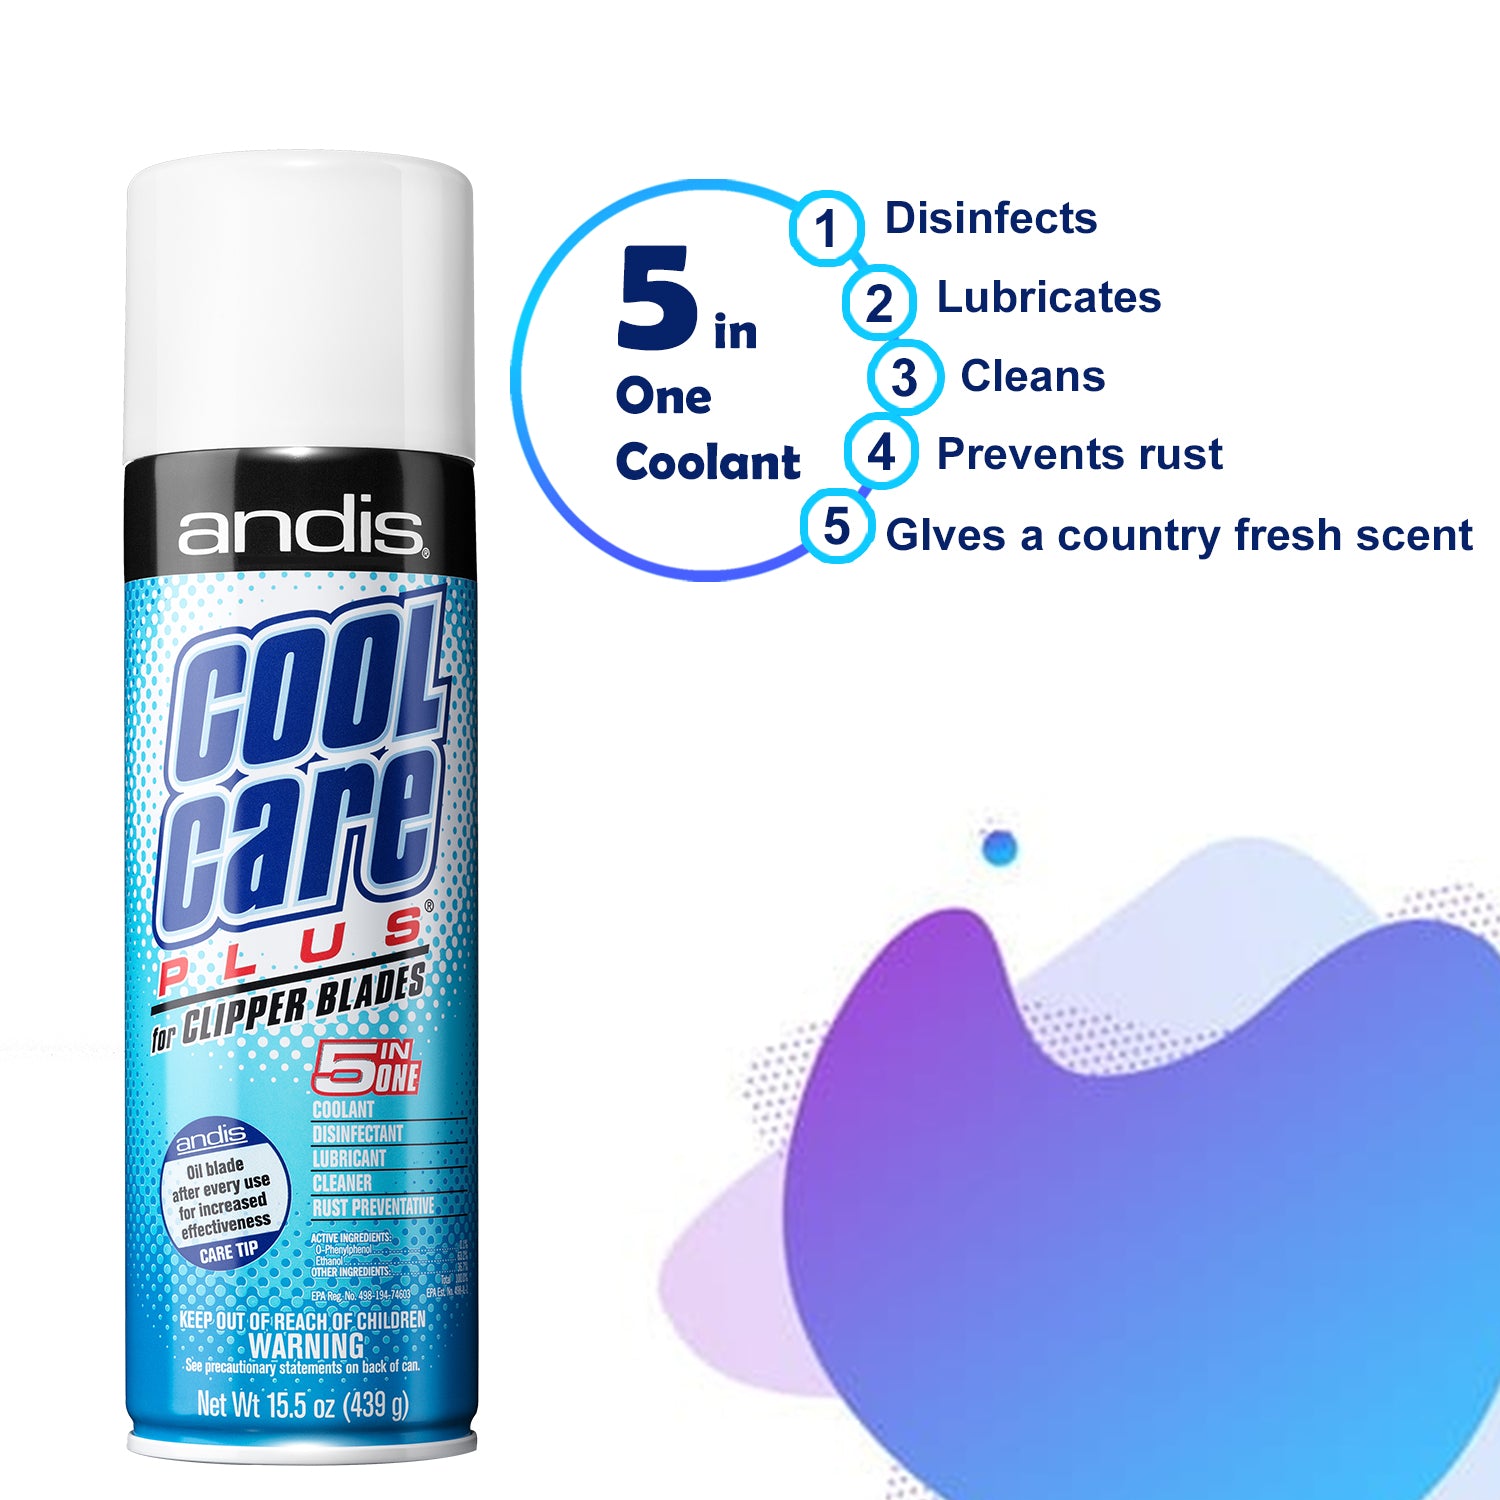 Andis 5-in-1 Cool Care Plus Clipper Blade Oil Spray Can